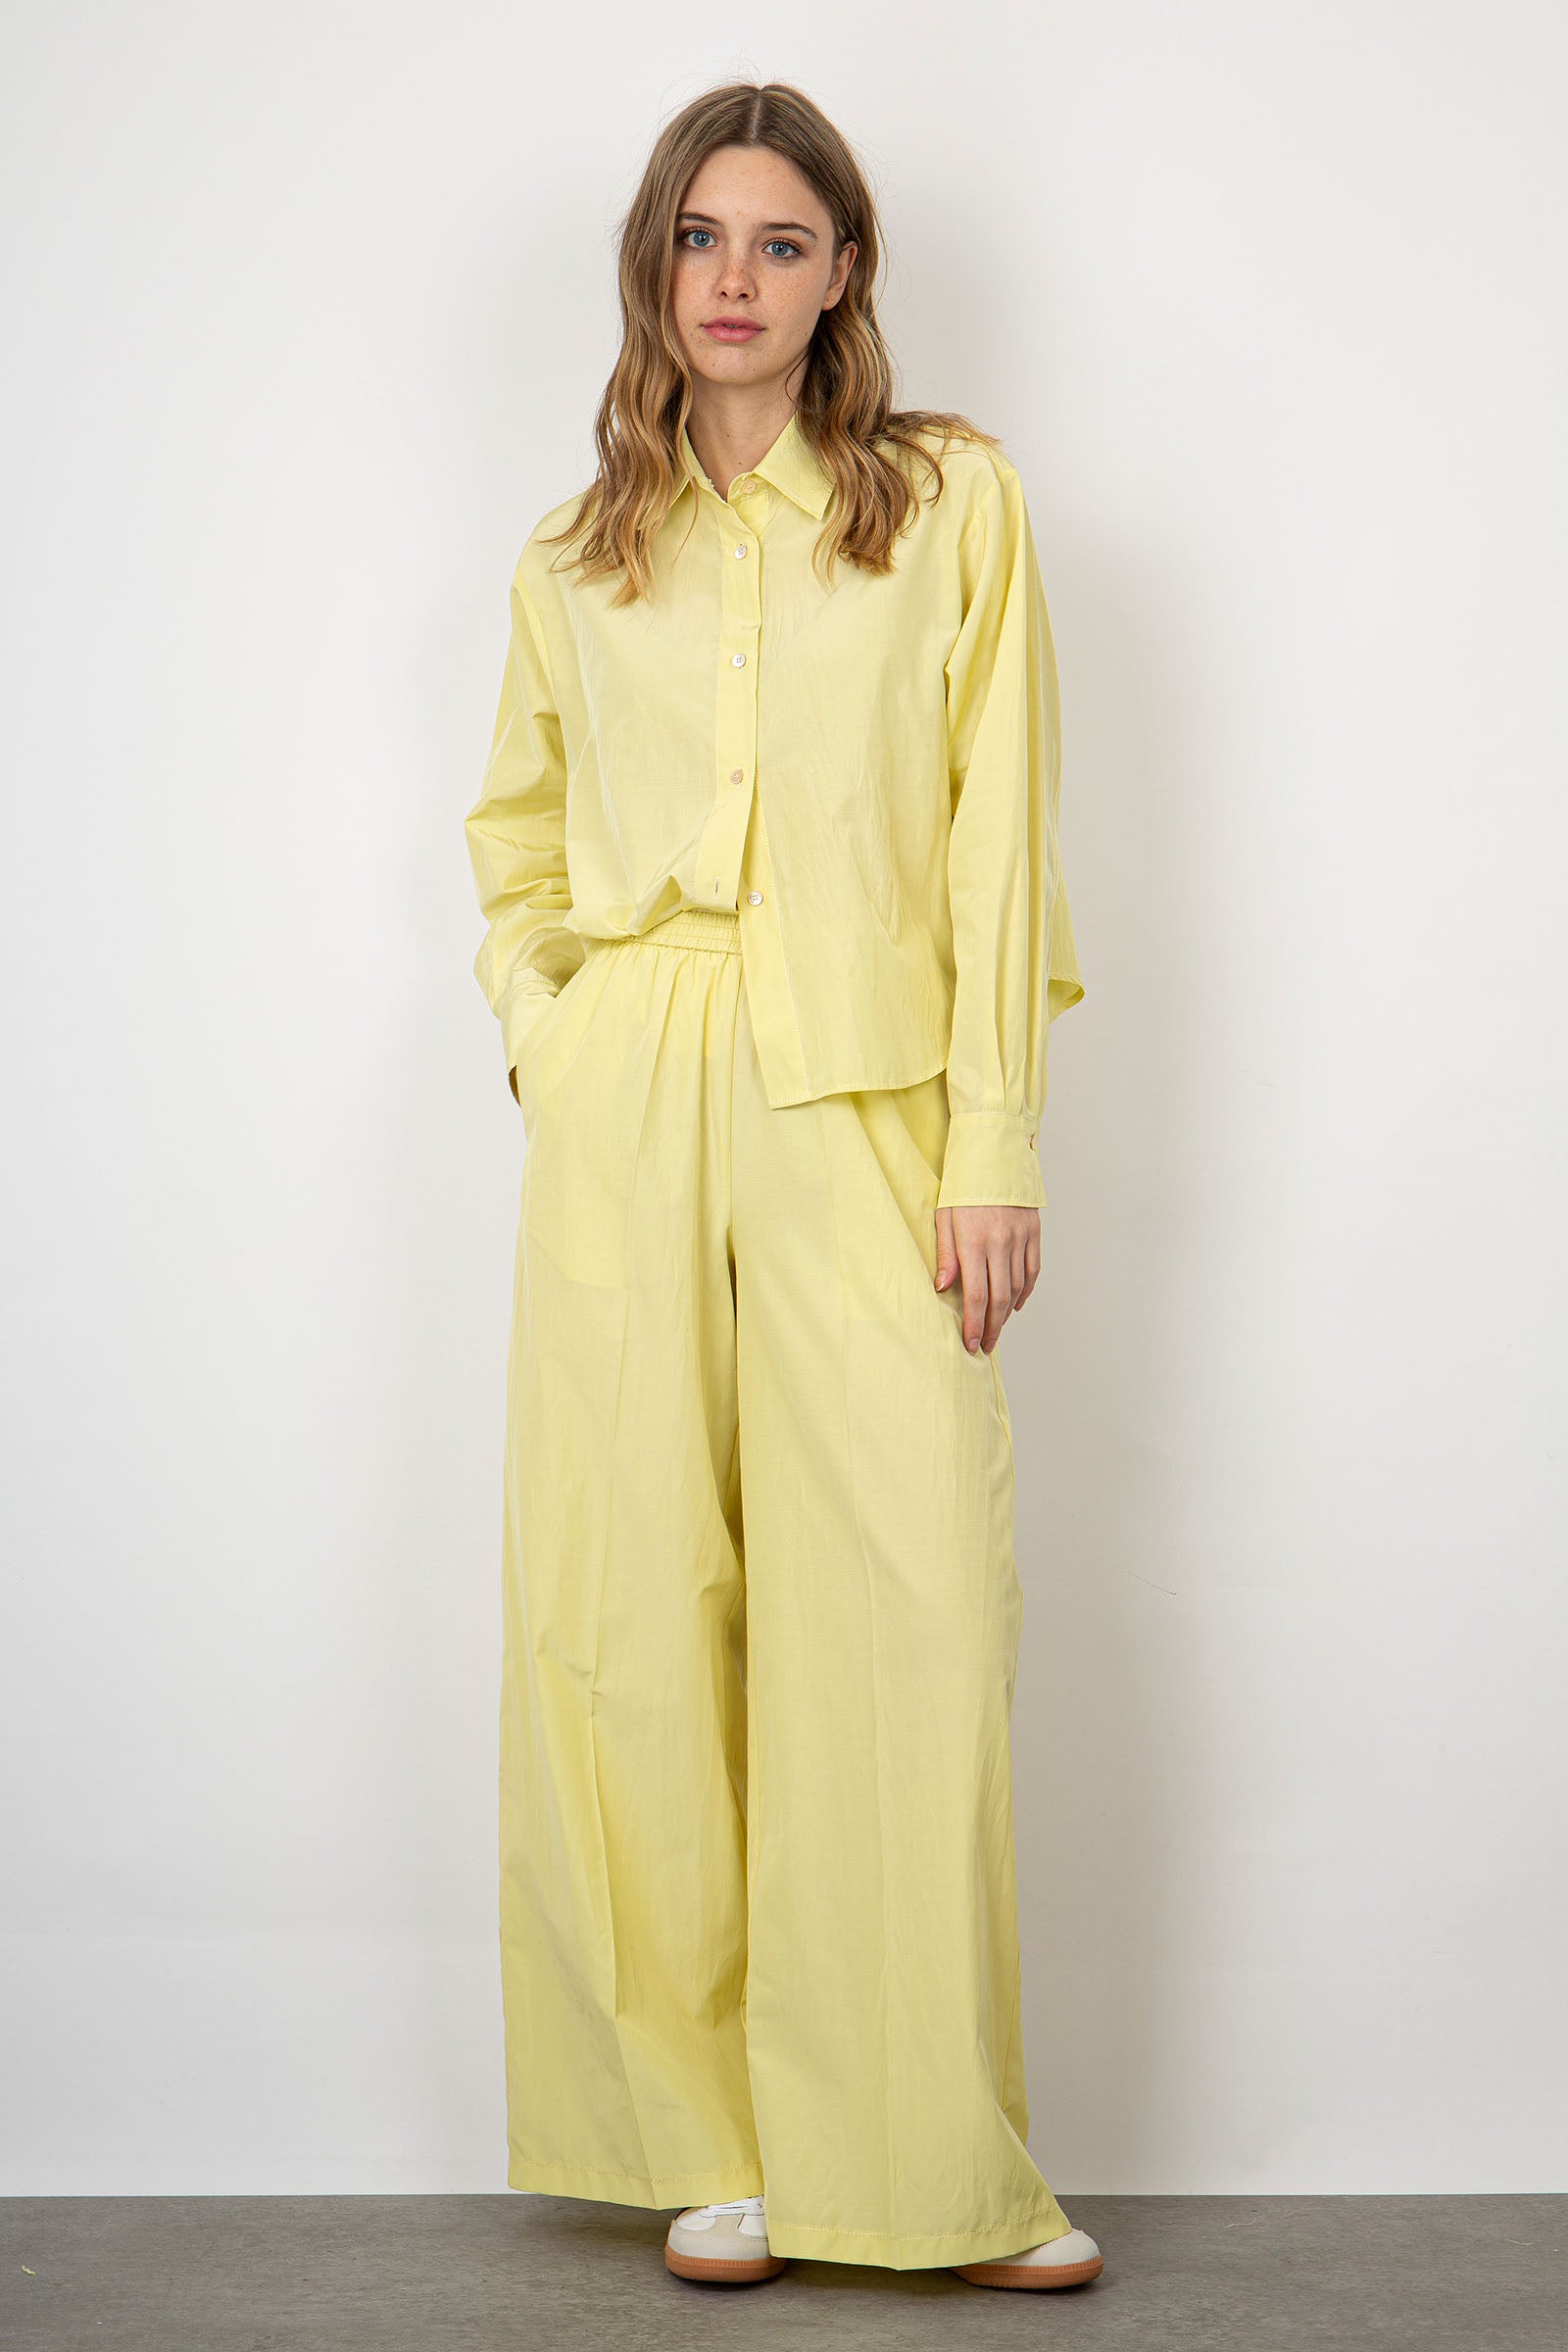 Forte Forte Boxy Chic Cotton Shirt in Yellow - 2